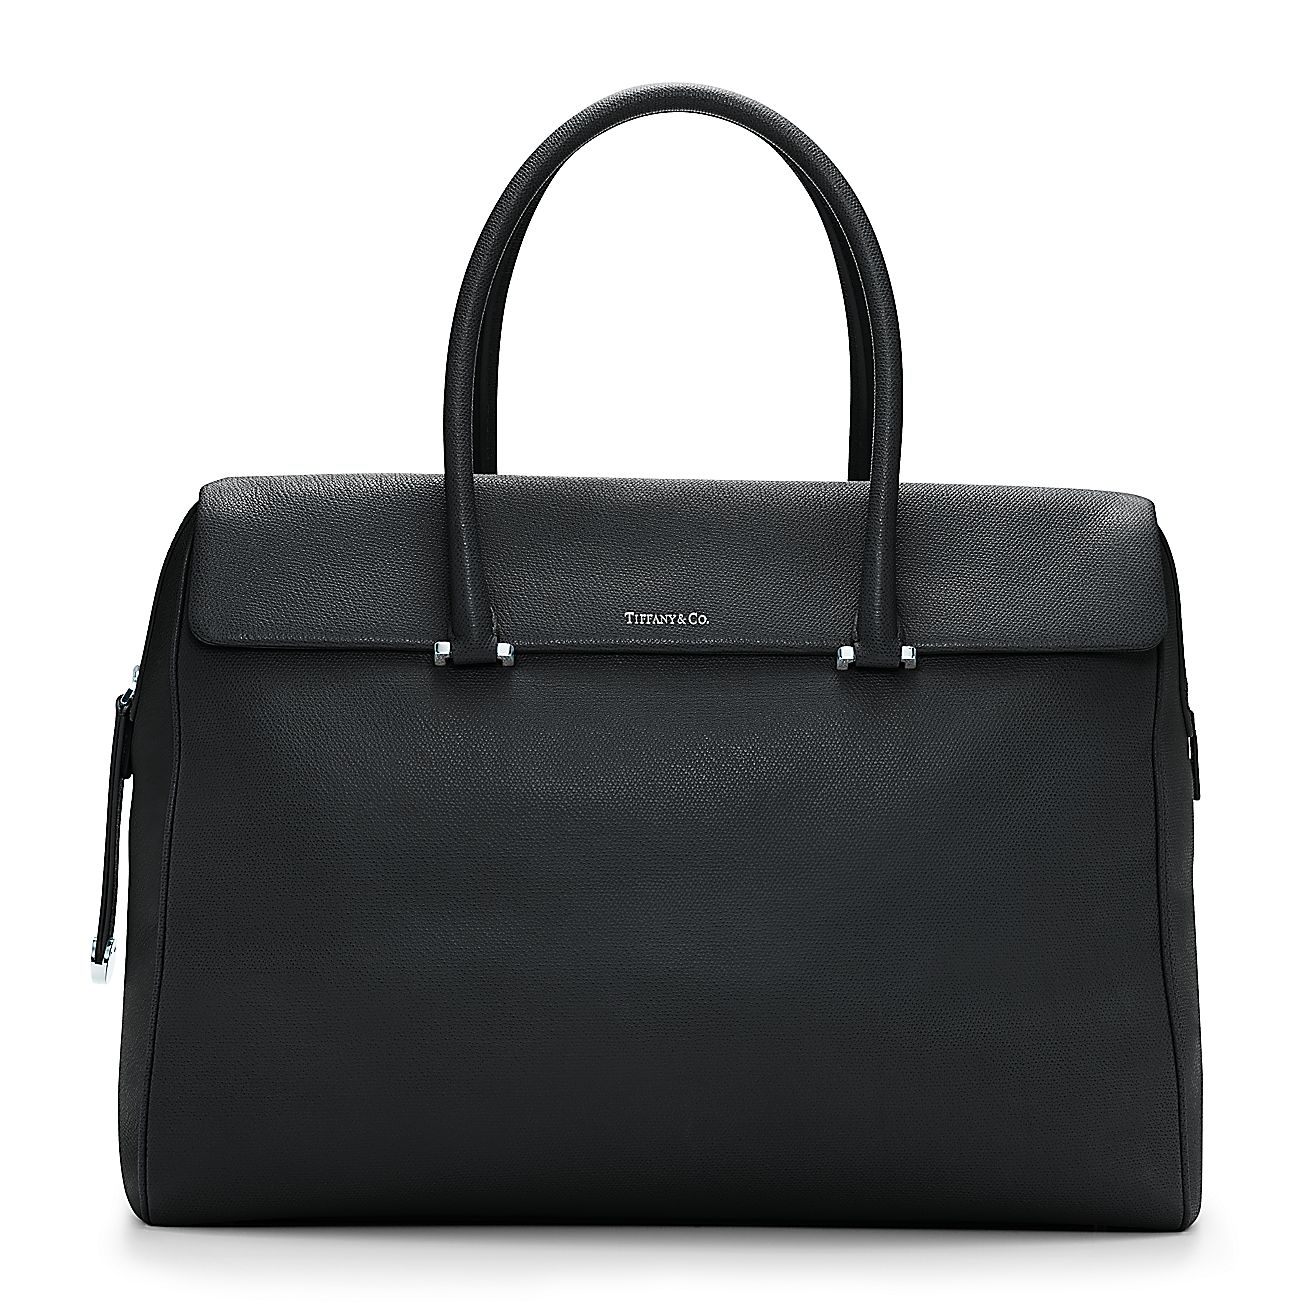 Peyton satchel in black textured leather. More colors available ...